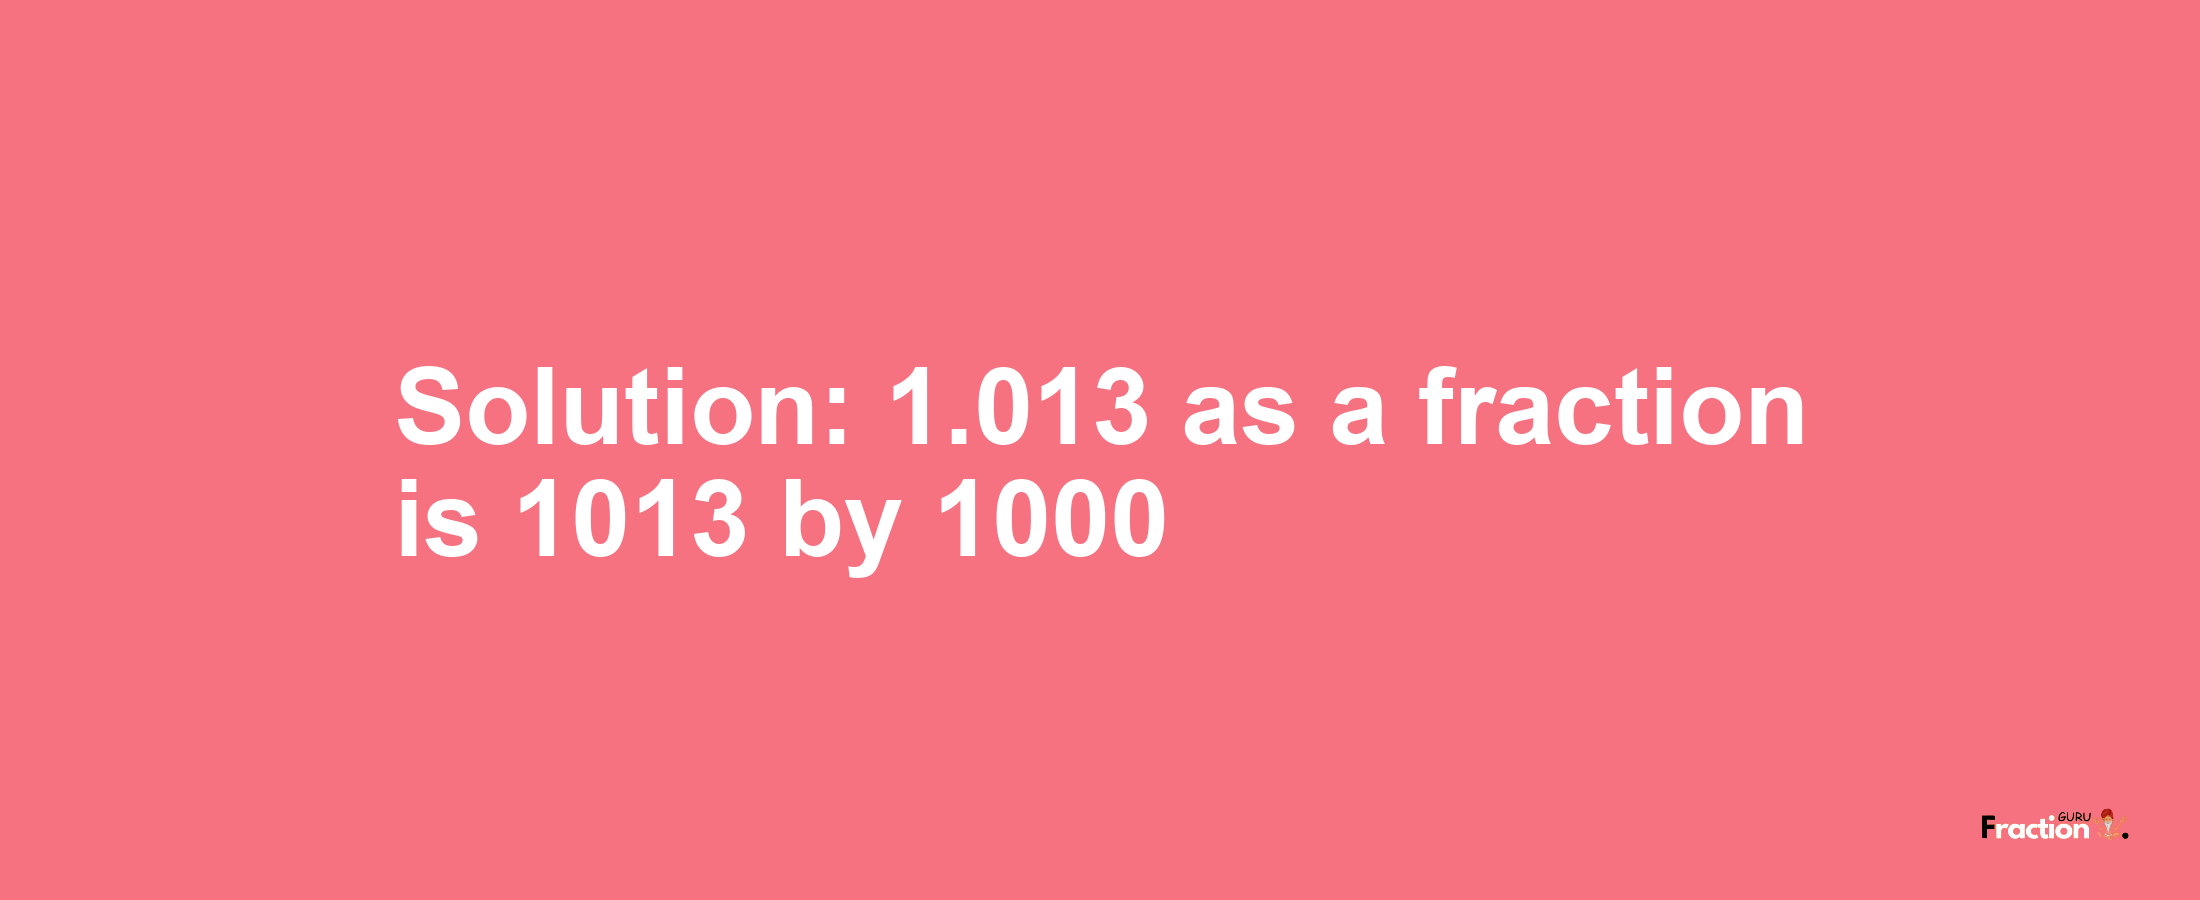 Solution:1.013 as a fraction is 1013/1000